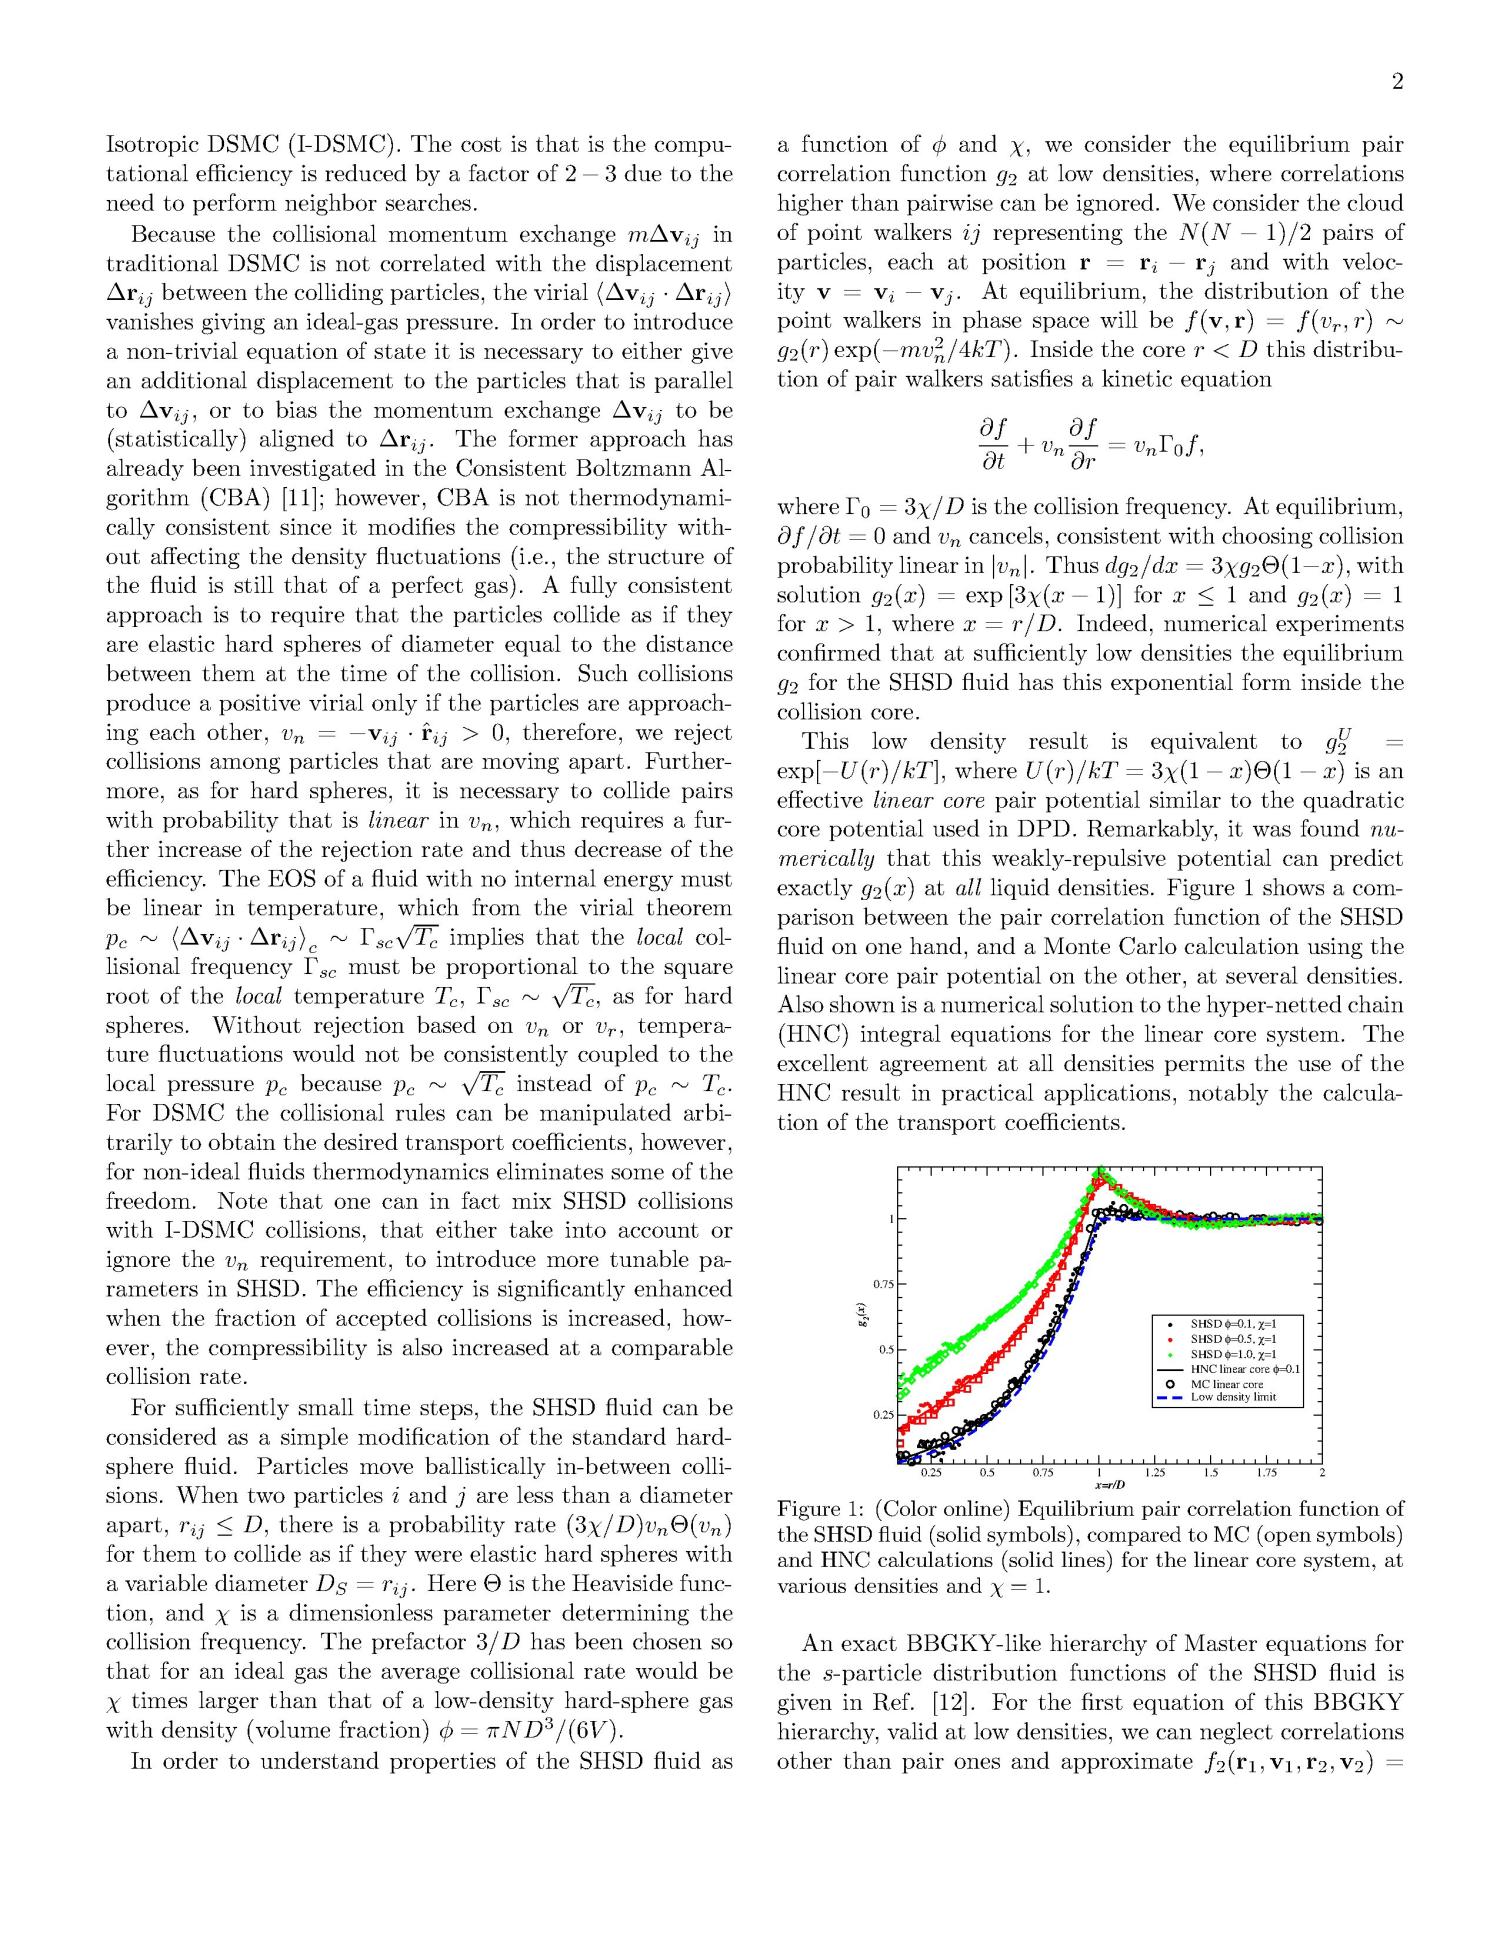 Stochastic Hard-Sphere Dynamics for Hydrodynamics of Non-Ideal Fluids
                                                
                                                    [Sequence #]: 4 of 6
                                                